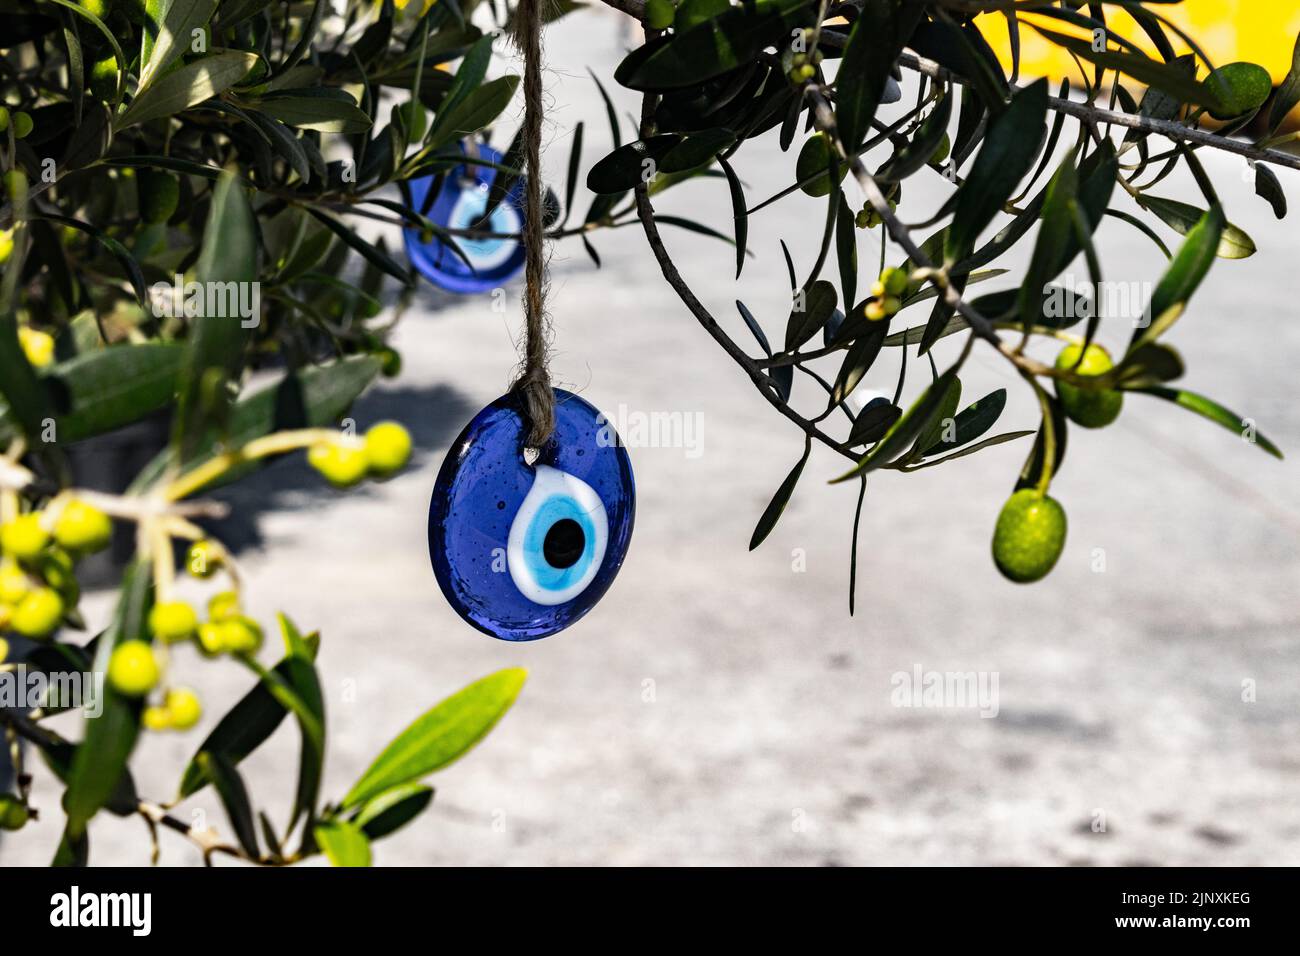 Nazar boncuk, a blue eye talisman, amulet to ward off the evil eye, hanging from olive tree in Istanbul, Turkey Stock Photo